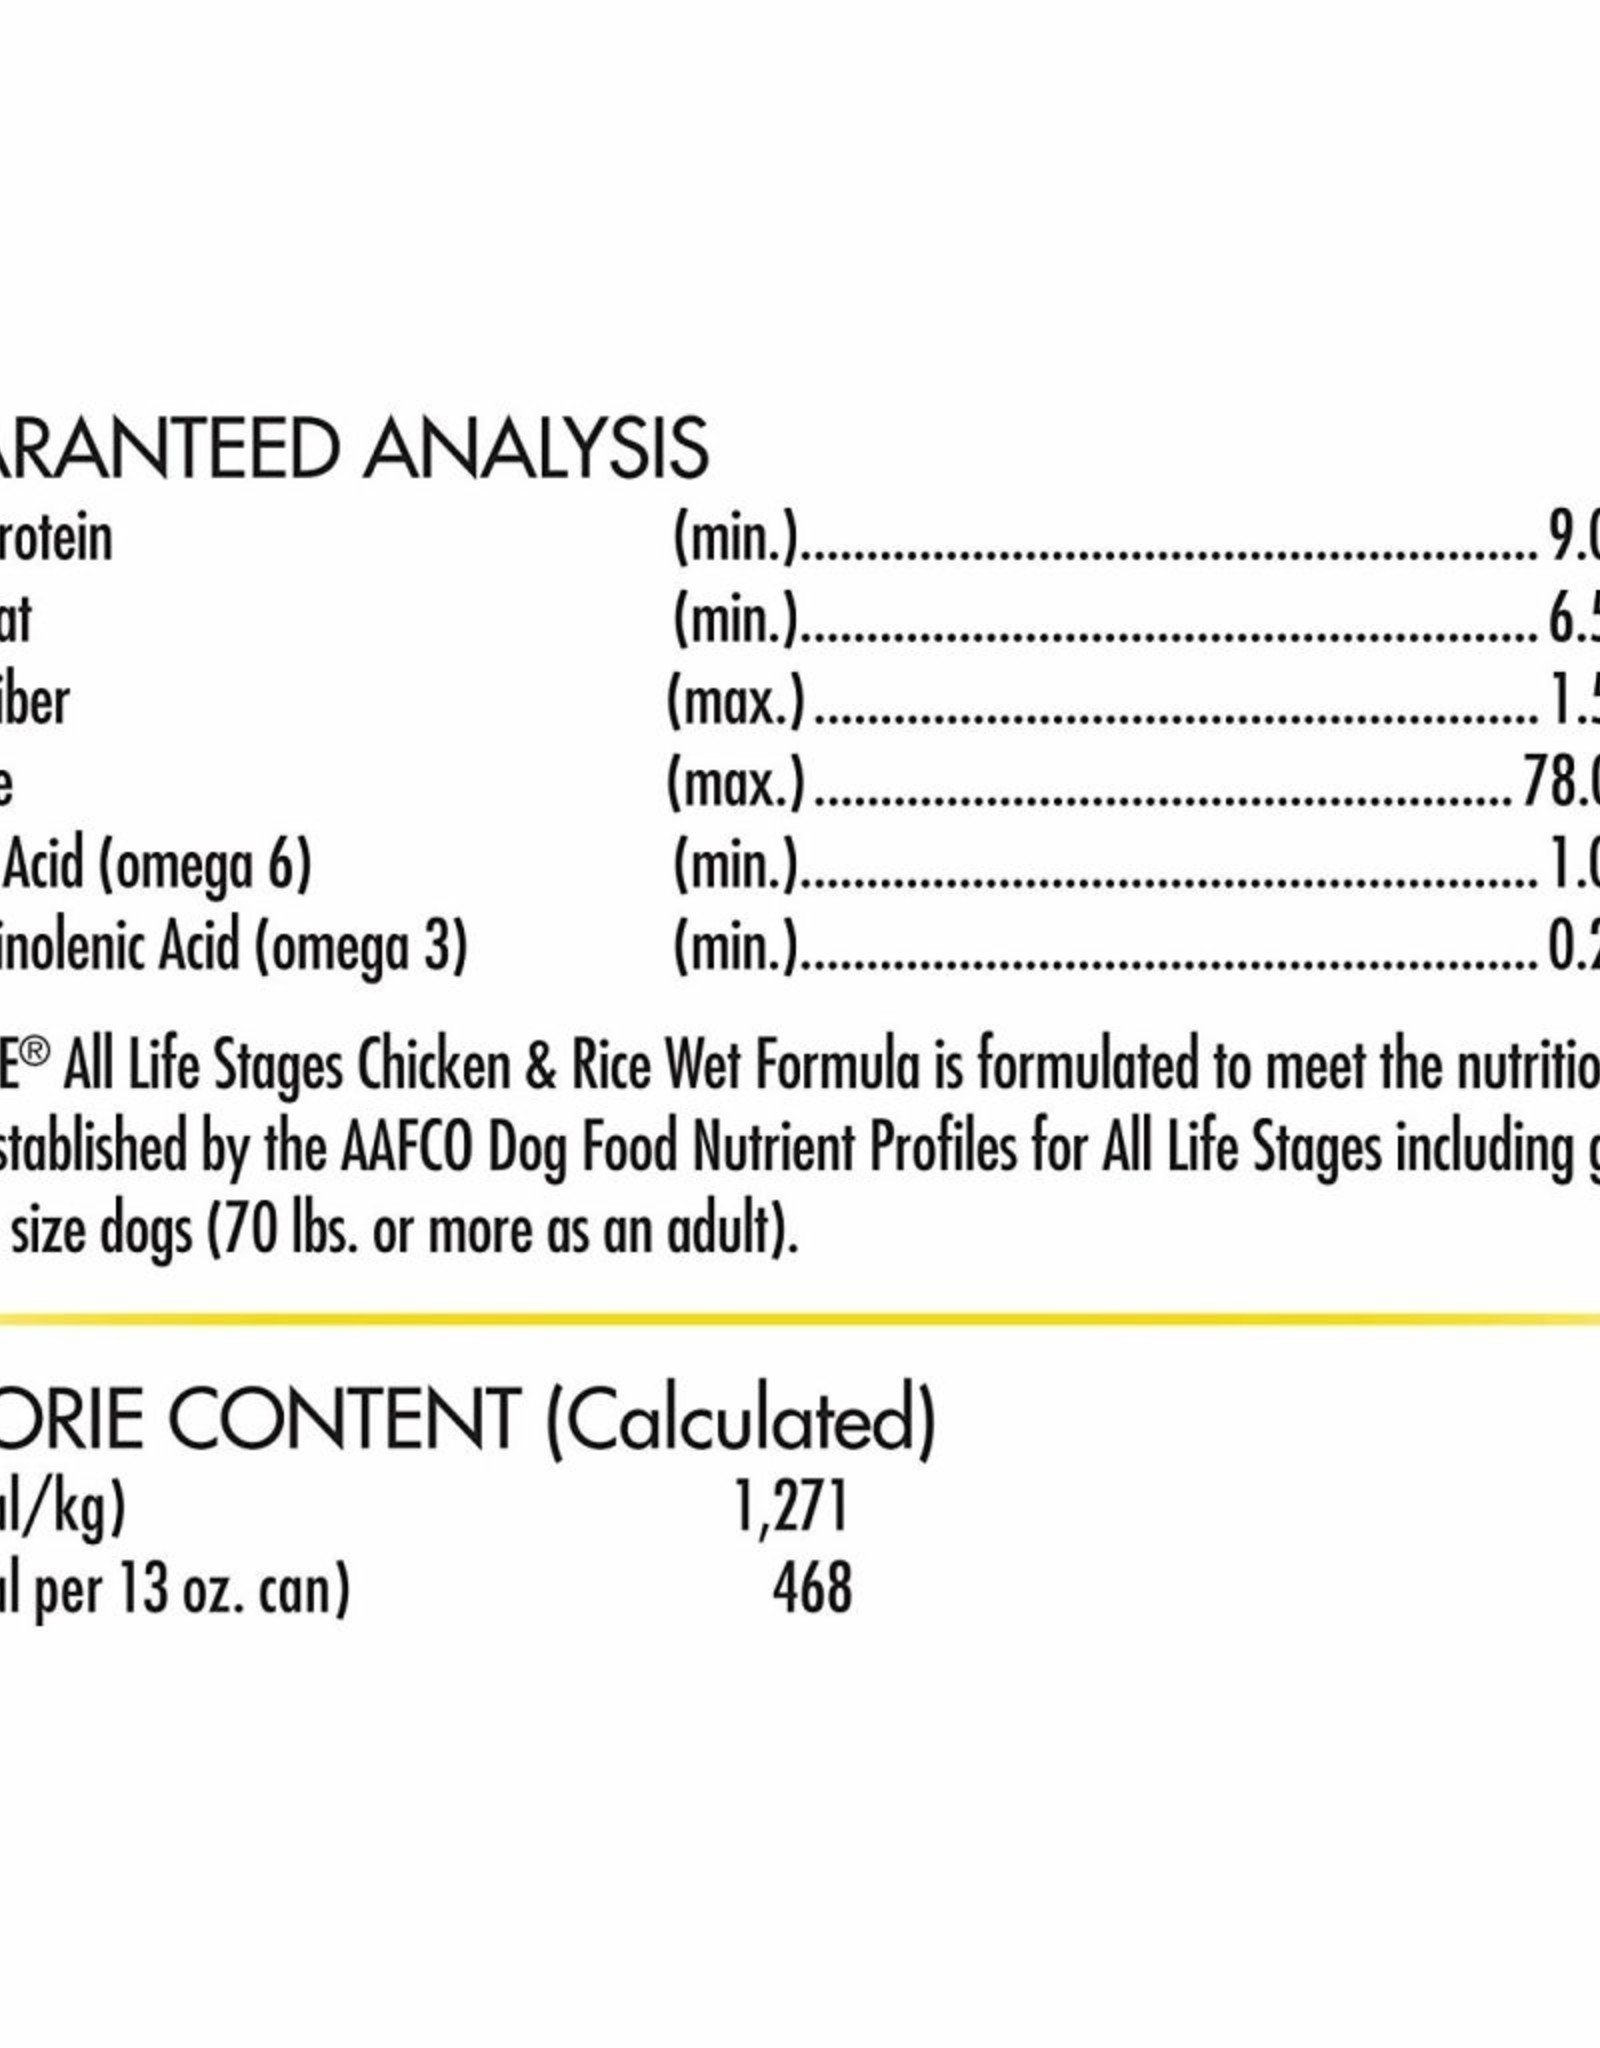 CANIDAE PET FOODS CANIDAE DOG CAN ALL LIFE STAGES CHICKEN & RICE 13 OZ CASE OF 12